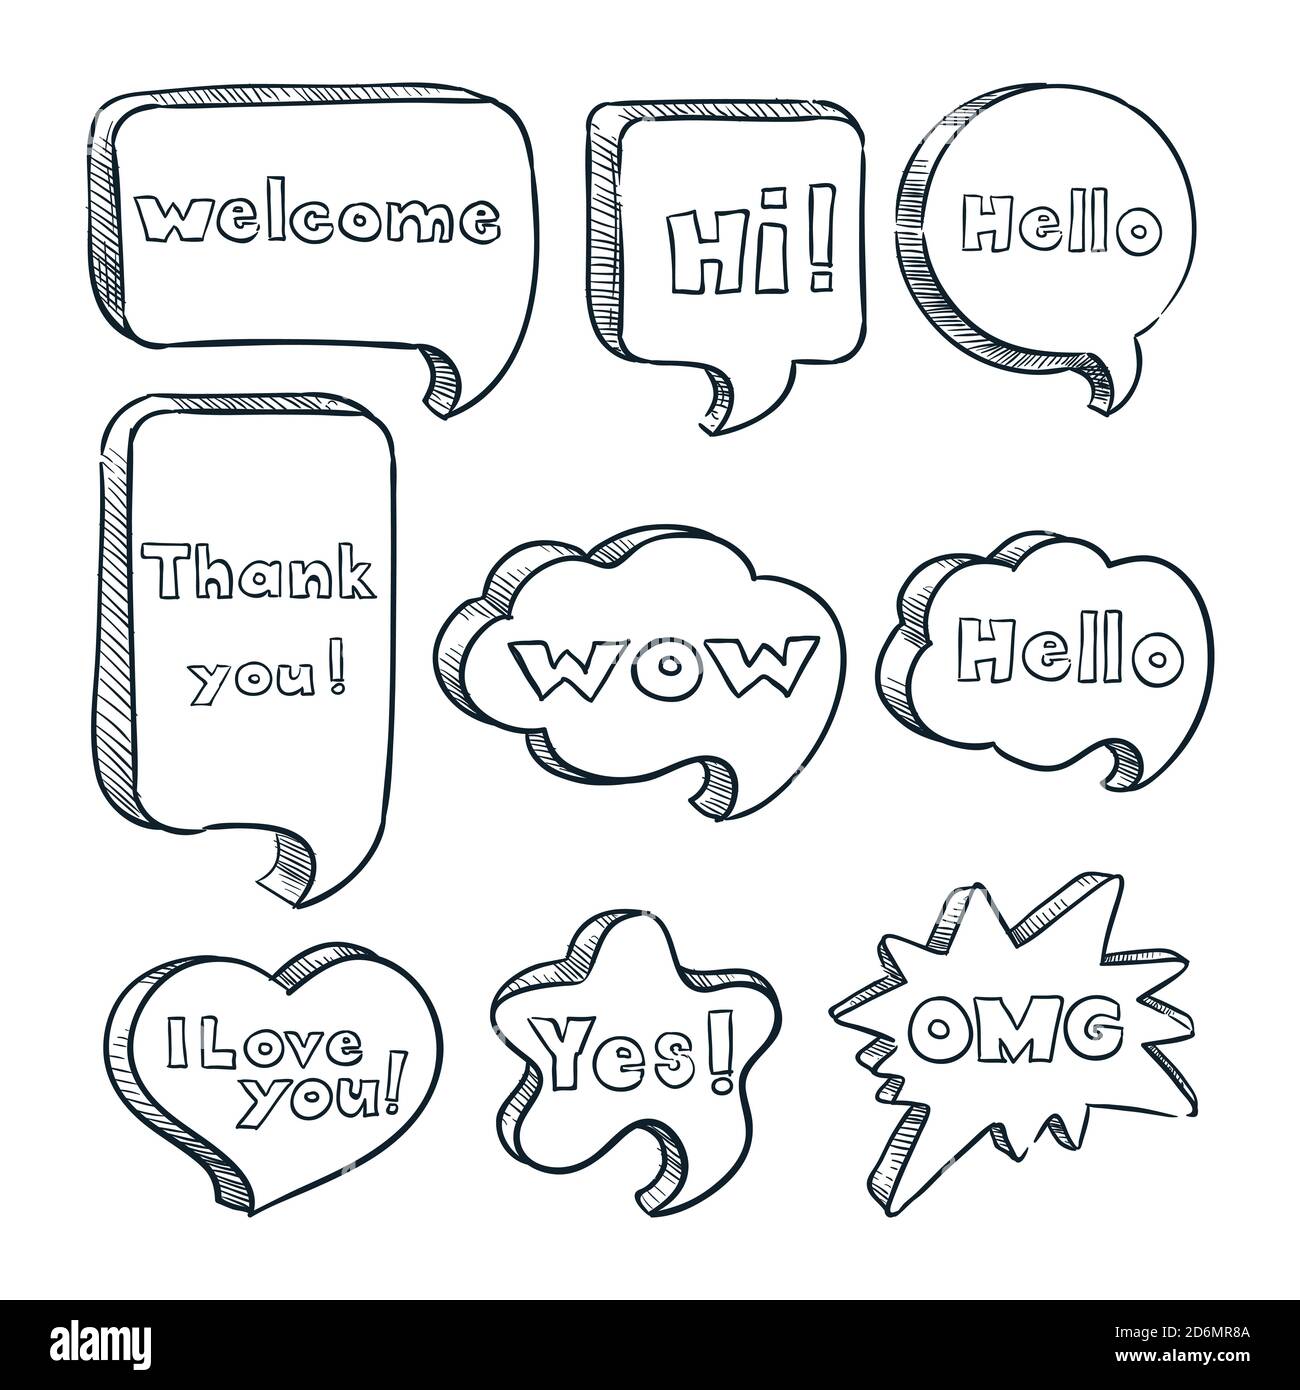 Speech bubbles with words and phrases, vector sketch illustration. Hand drawn comic text clouds with messages. Dialog icons, stickers and design eleme Stock Vector